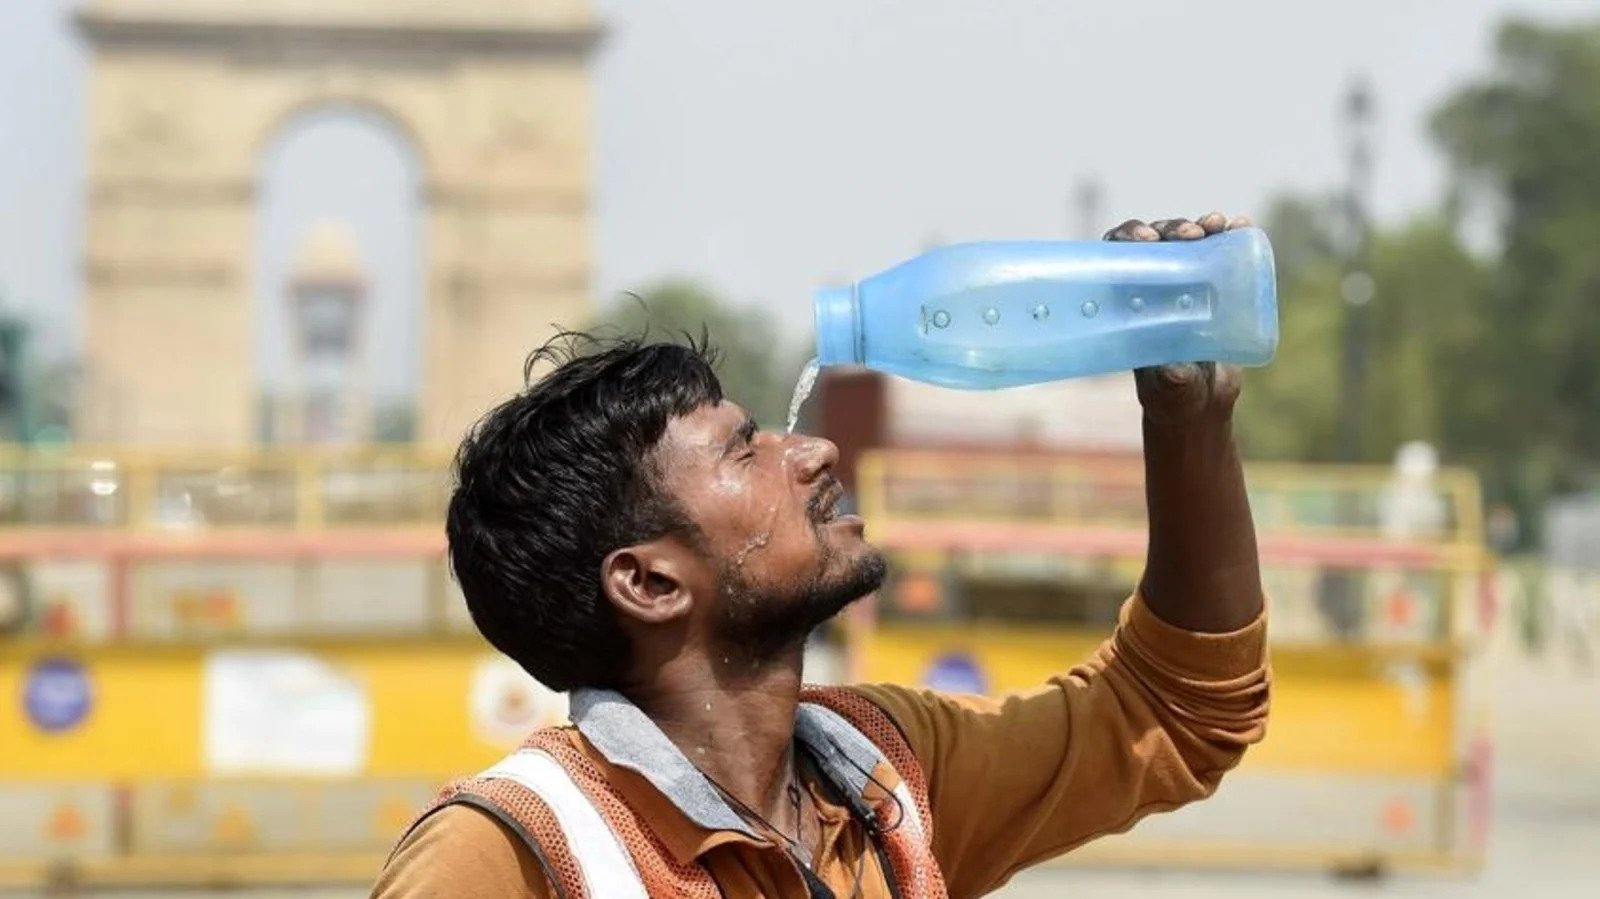 49 Degree Celsius Reached In Delhi, Twitter Users Showed Humour